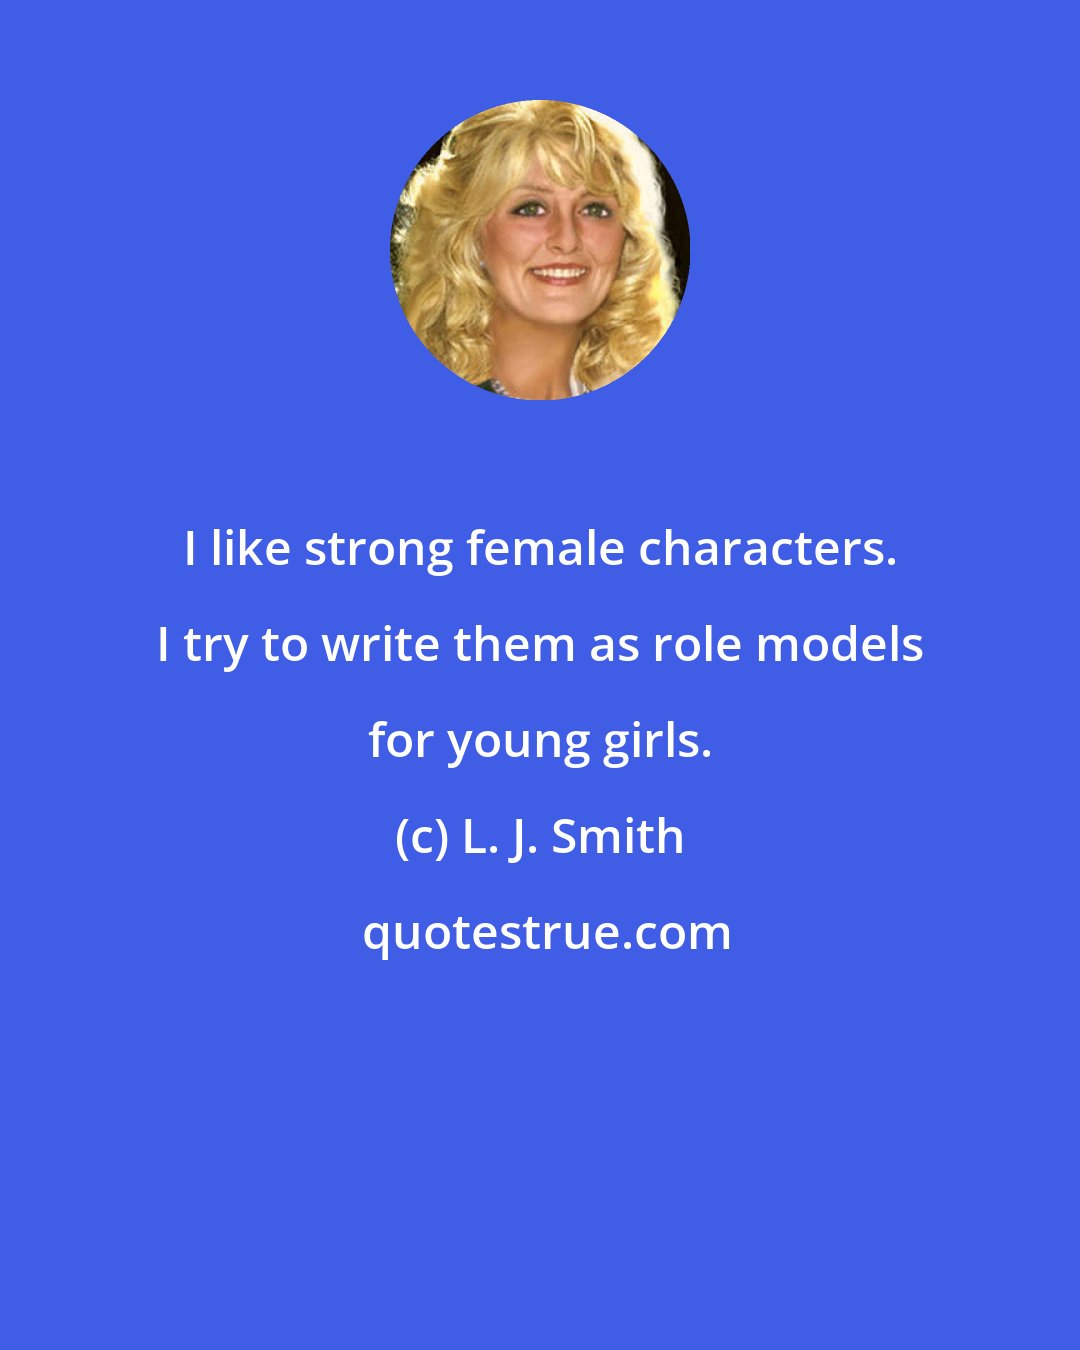 L. J. Smith: I like strong female characters. I try to write them as role models for young girls.